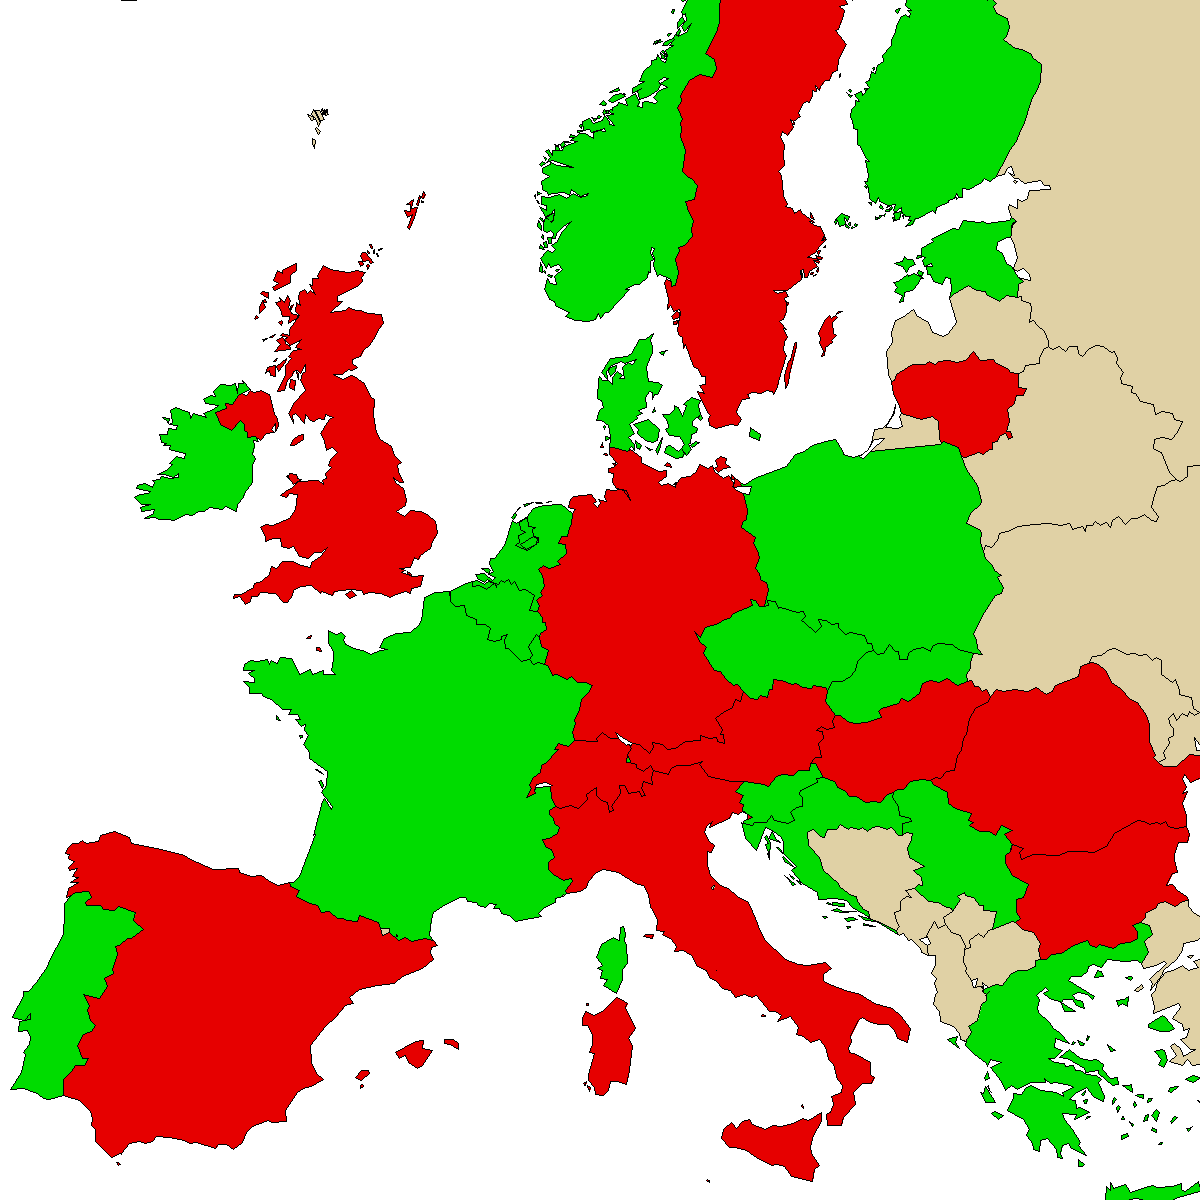 legal info map for our product 2FDCK, green are countries where we found no ban, red with ban, grey is unknown